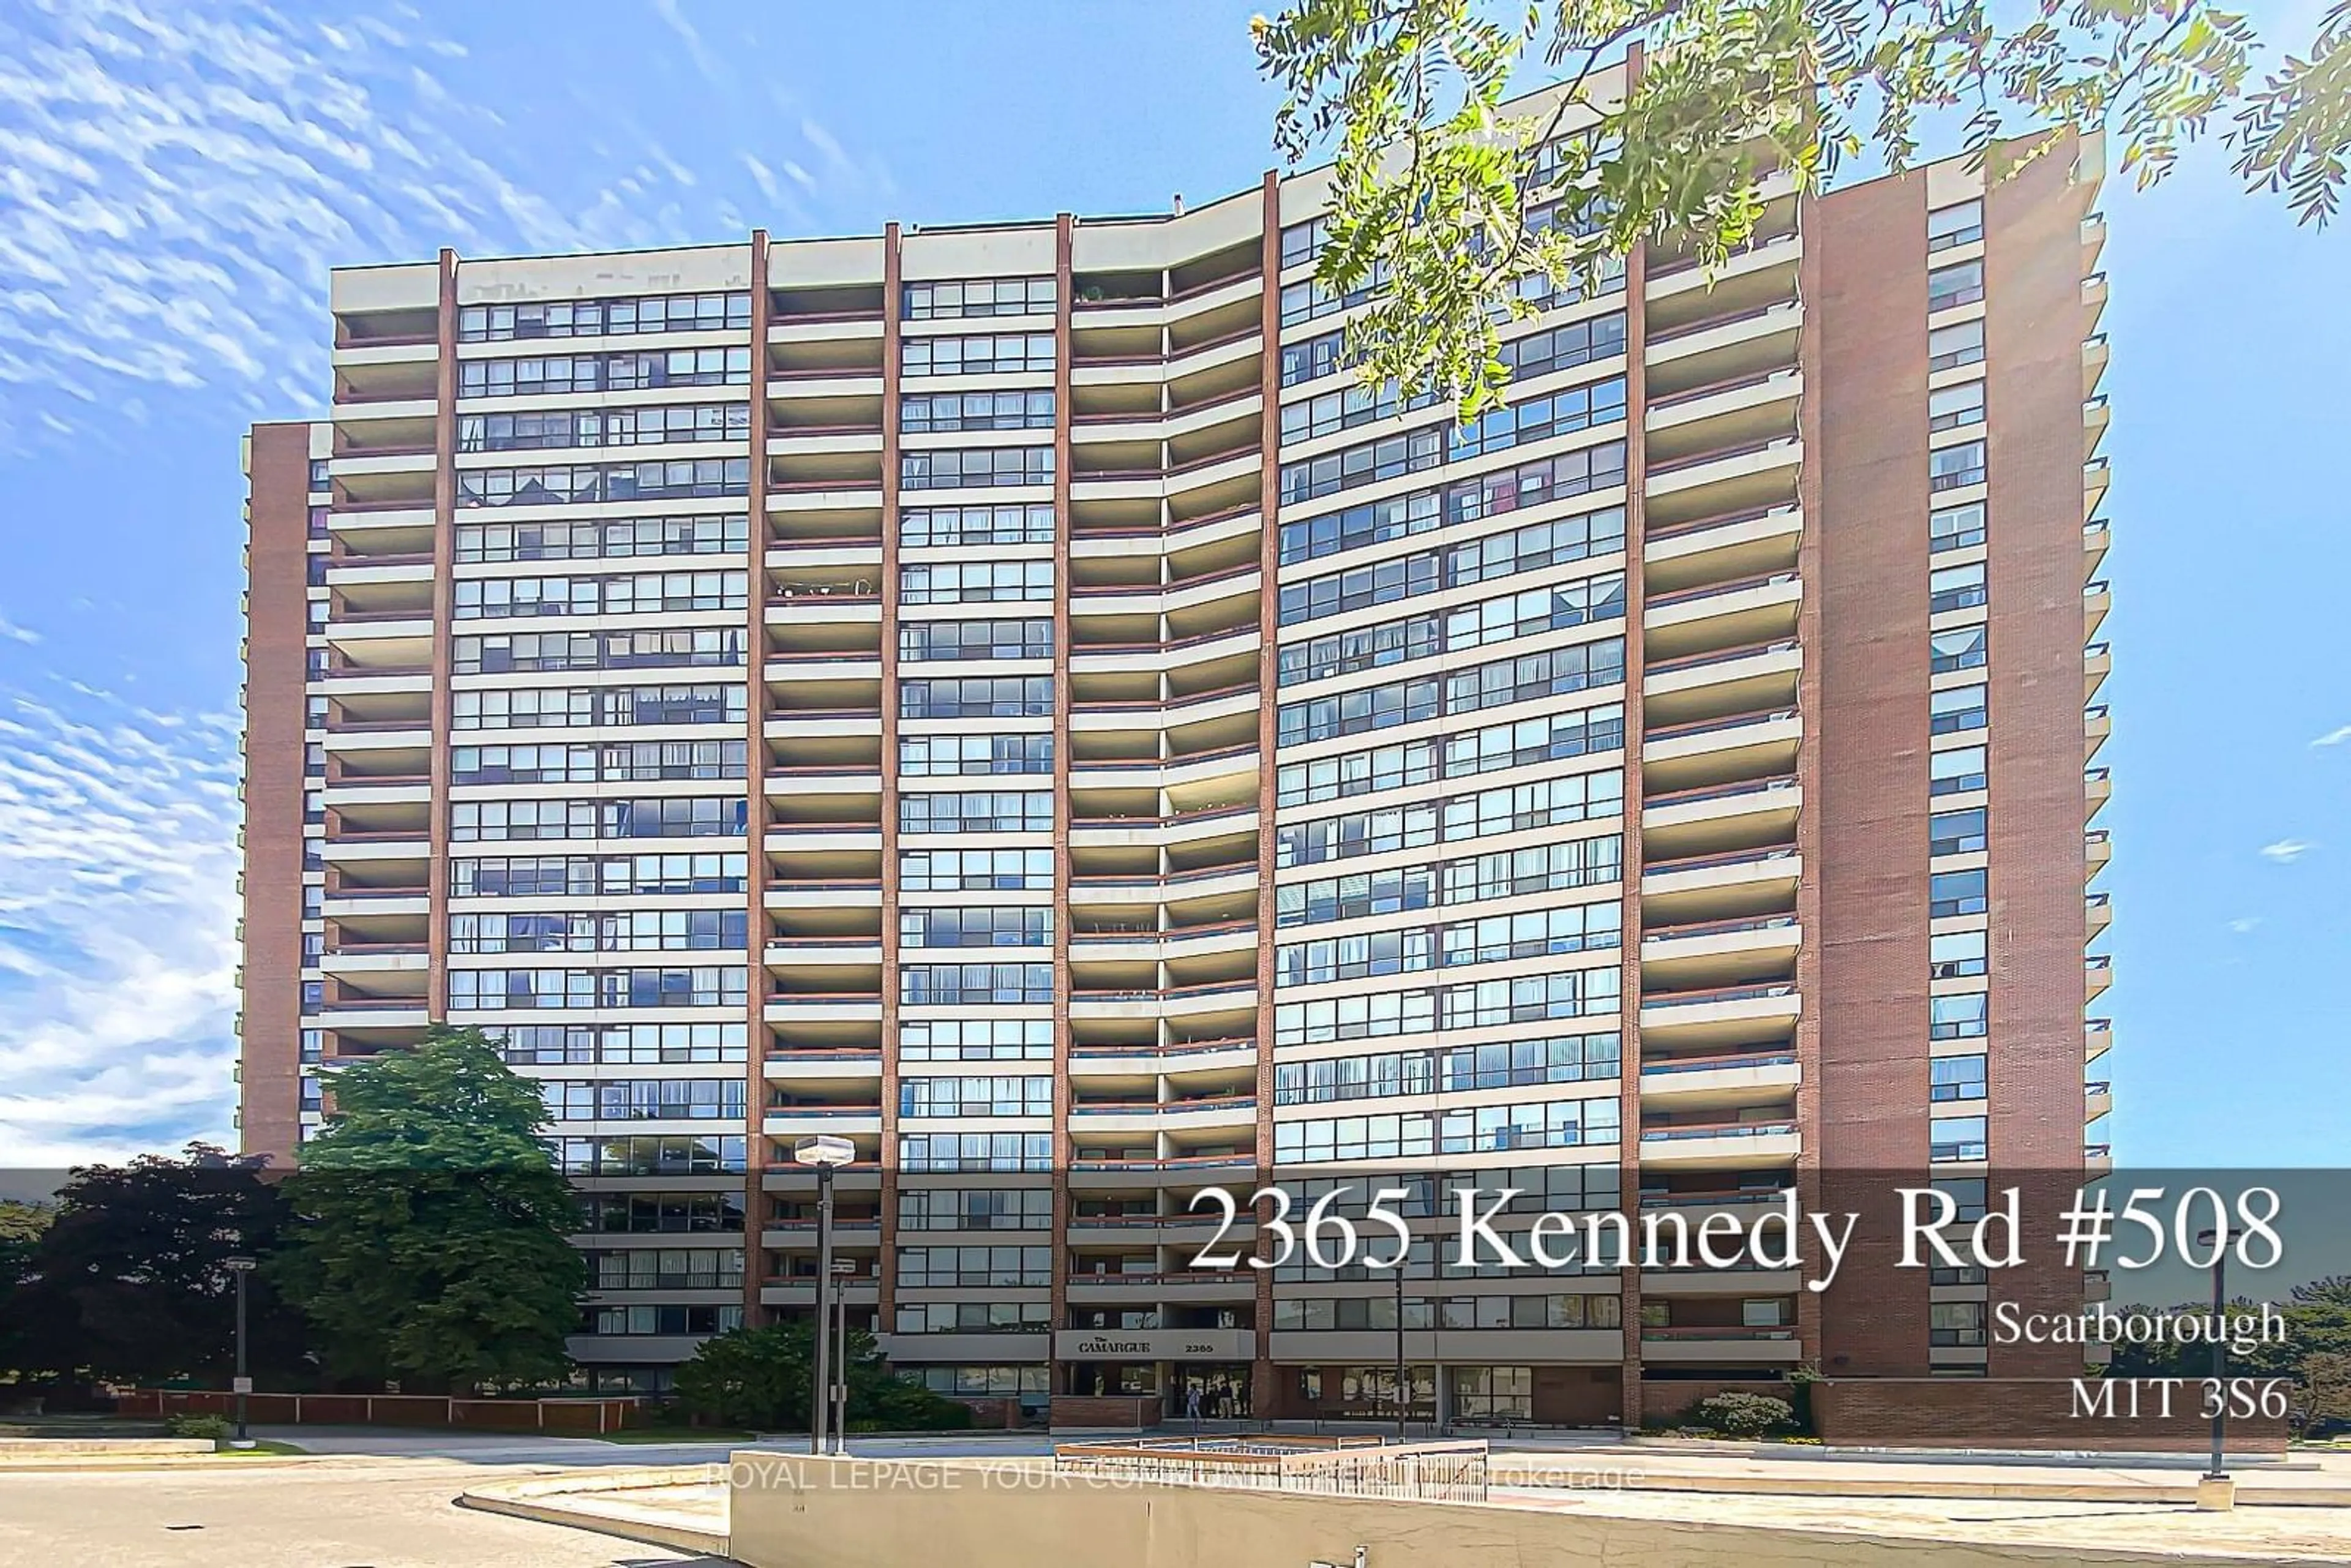 A pic from exterior of the house or condo for 2365 Kennedy Rd #508, Toronto Ontario M1T 3S6